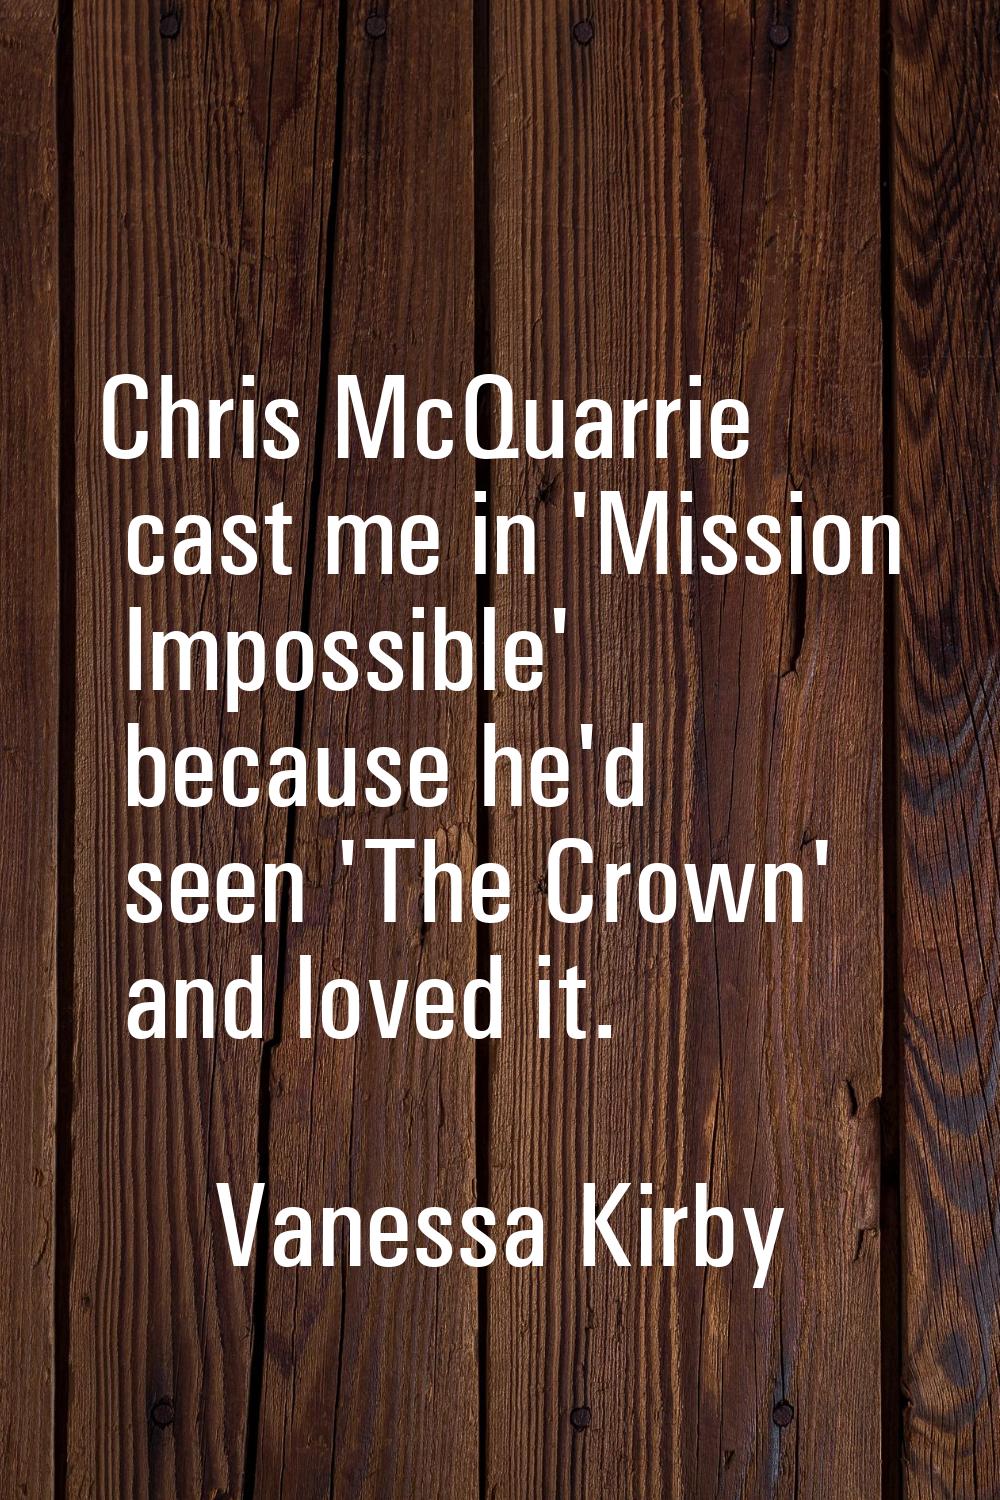 Chris McQuarrie cast me in 'Mission Impossible' because he'd seen 'The Crown' and loved it.